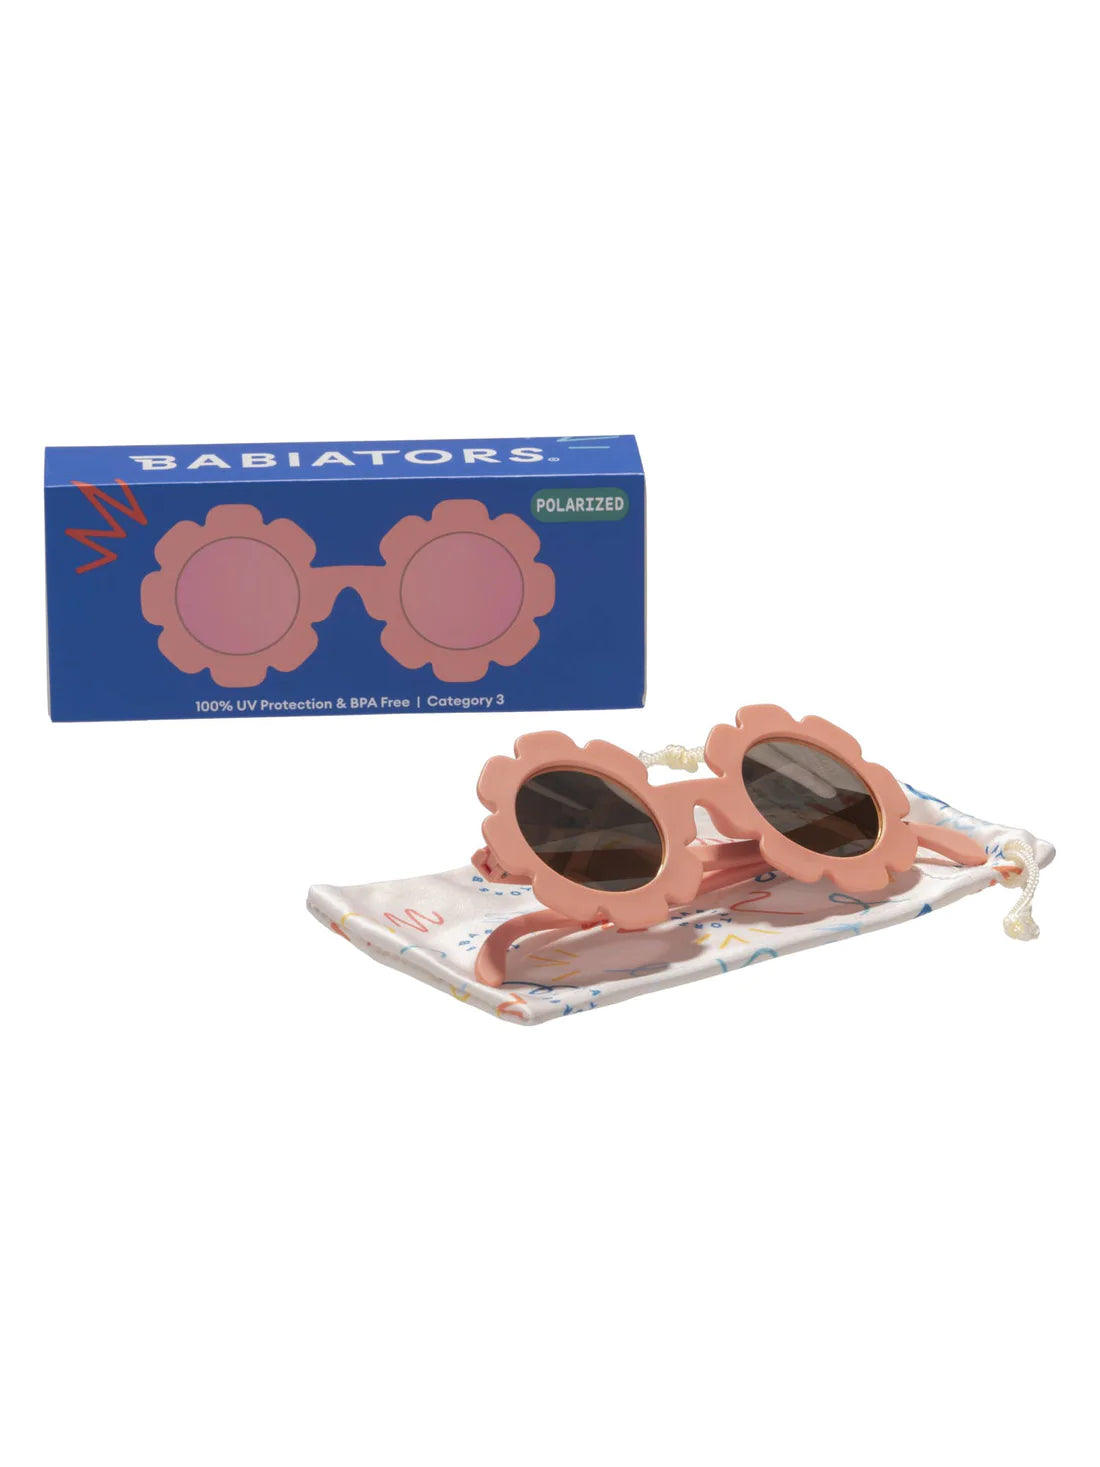 Flower Peachy Keen Polarized Sunglasses with Rose Gold Mirrored Len